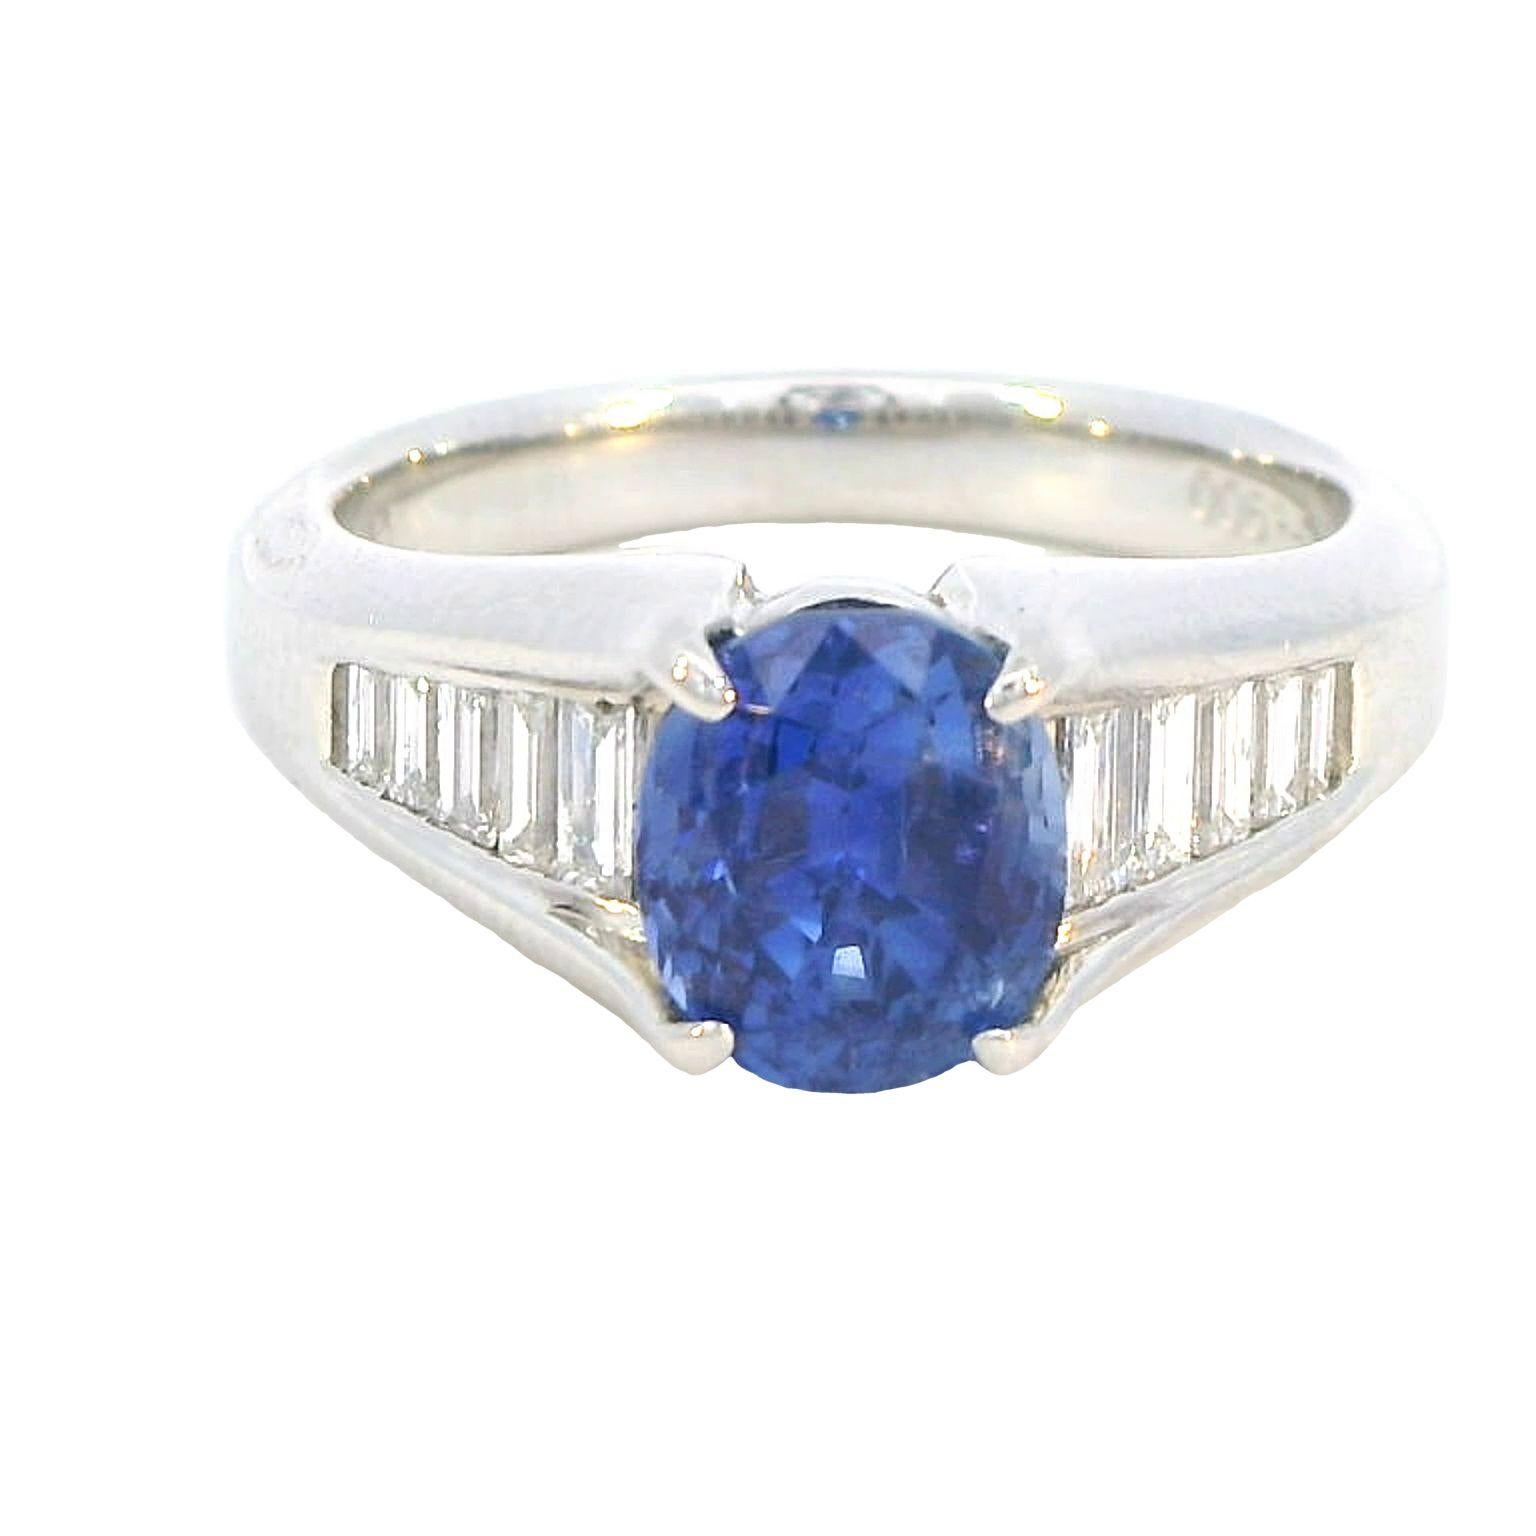 Elevate your style with our exquisite Diamond and Blue Sapphire Ring, a true embodiment of sophistication and luxury. This stunning piece features a harmonious combination of 0.31 carats of dazzling diamonds and a magnificent 2.49-carat blue